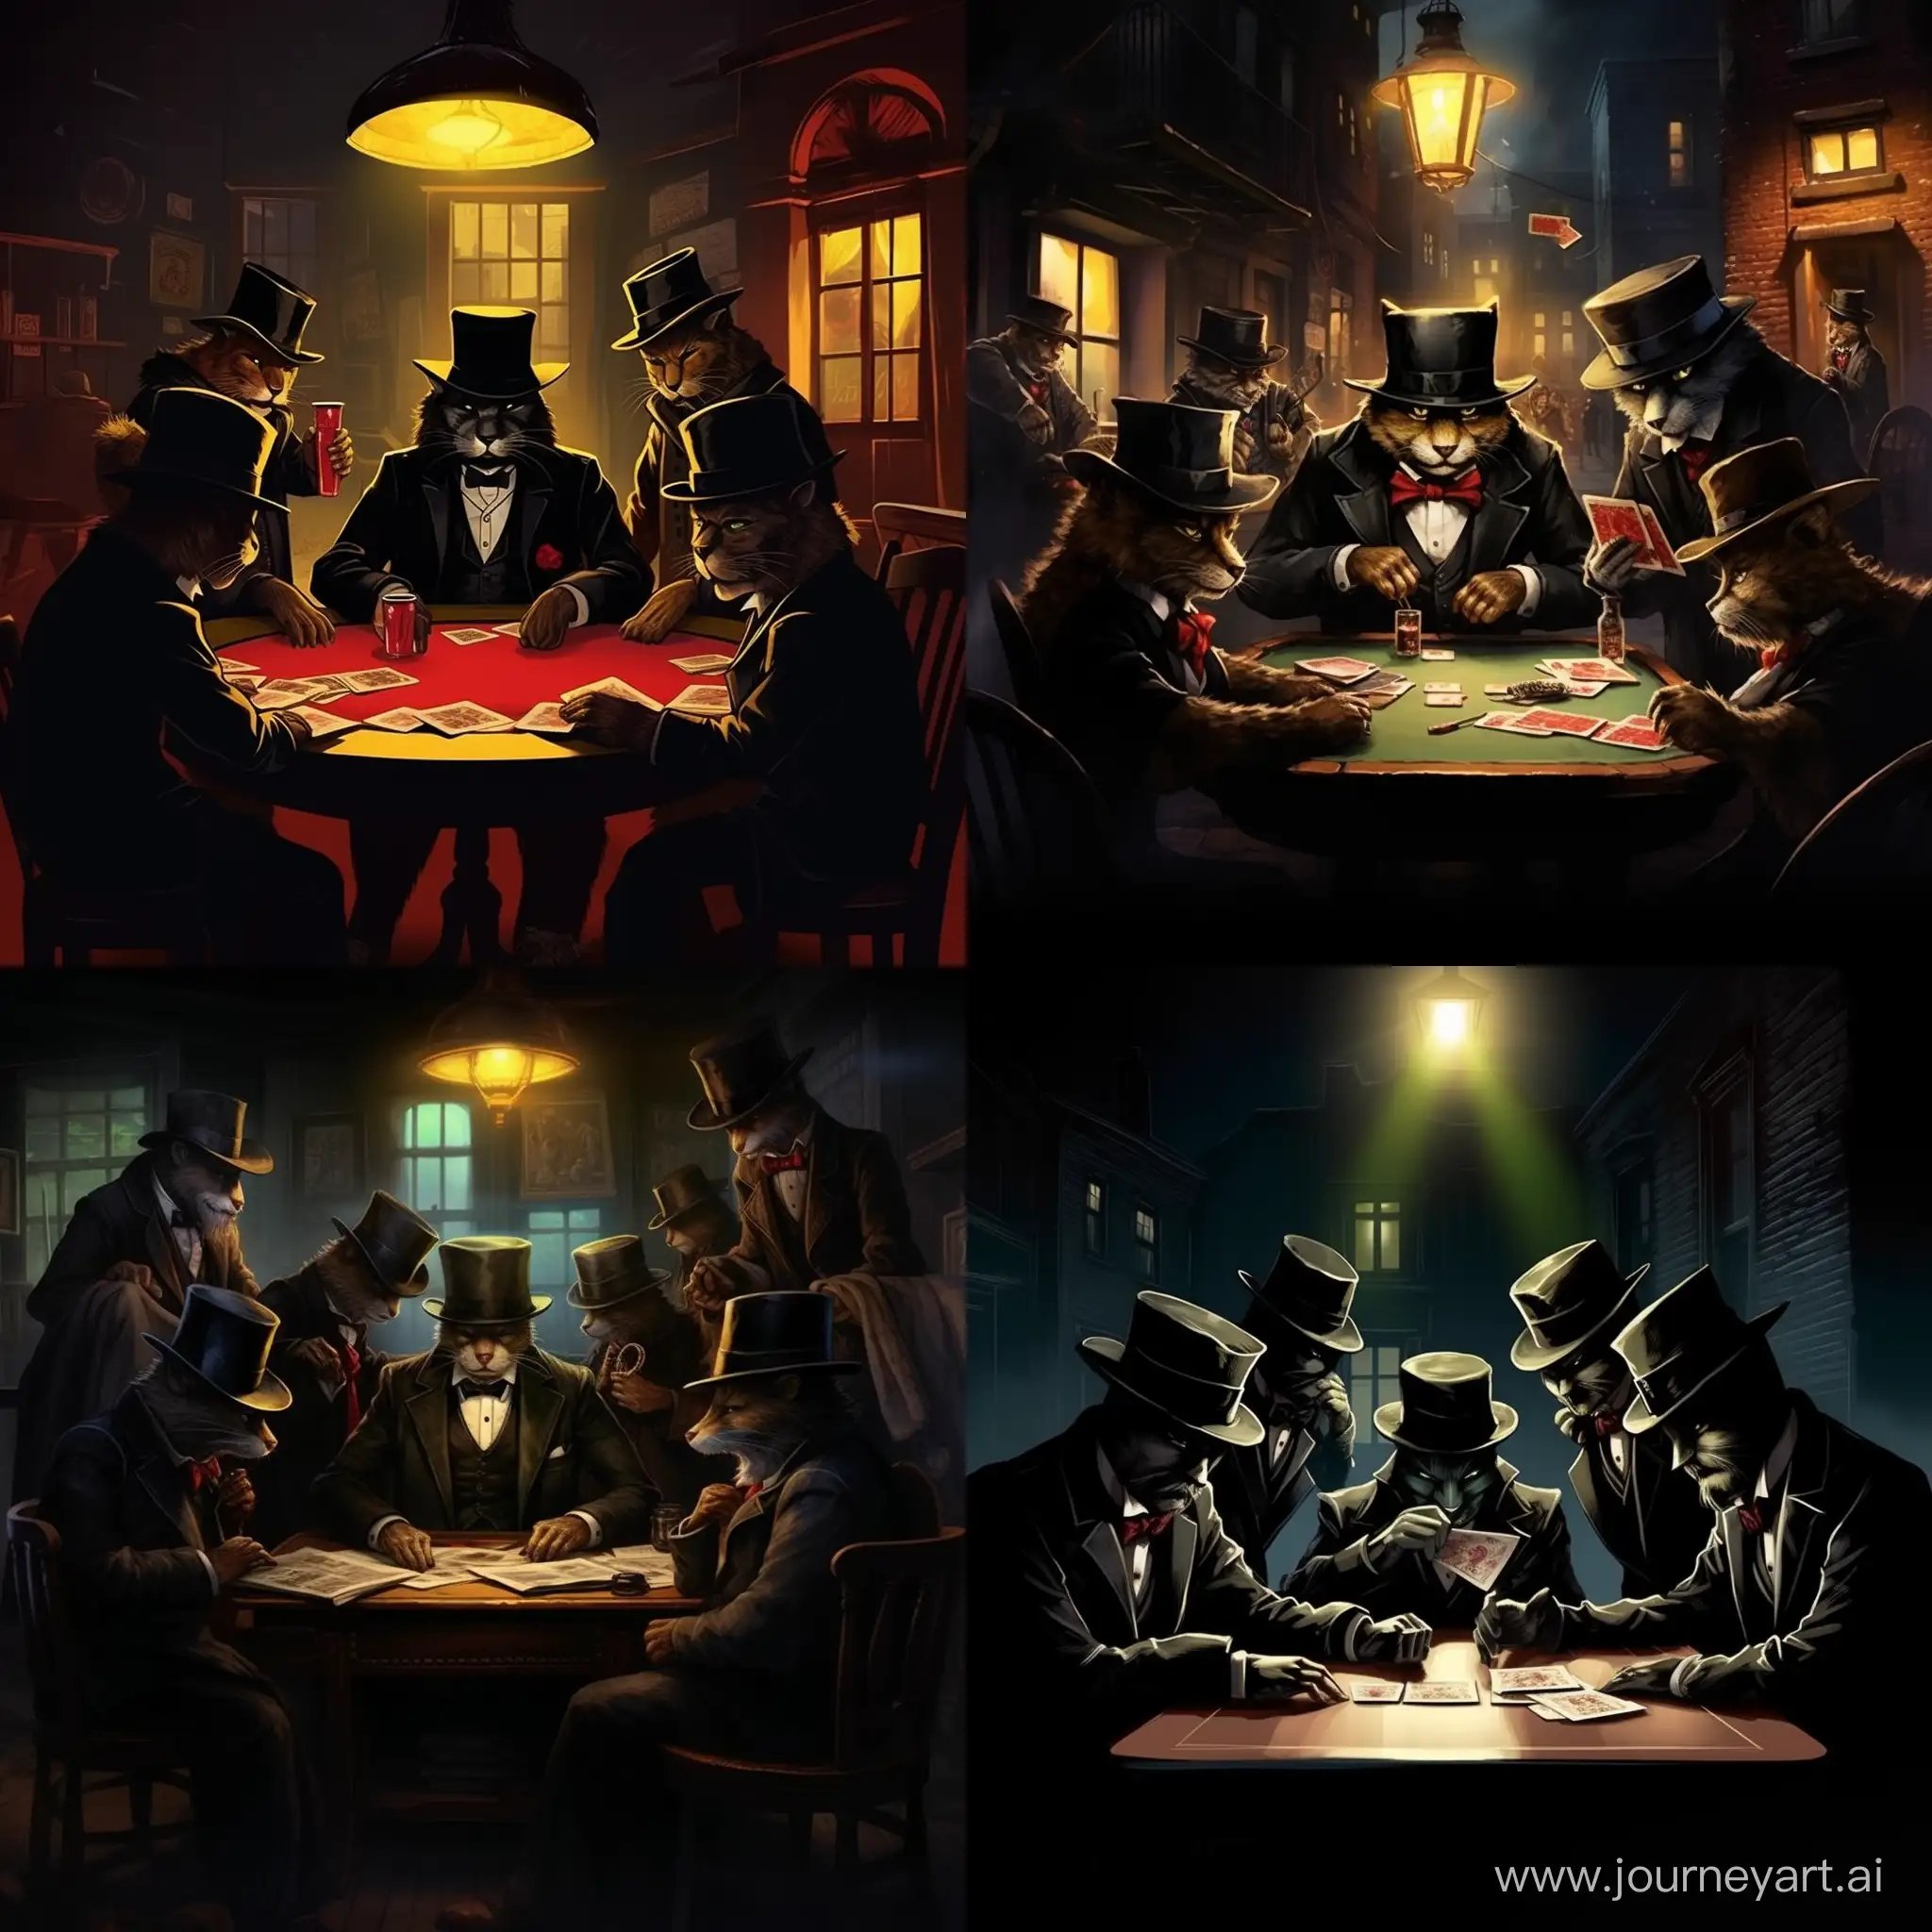 Sleek-Cats-Engage-in-a-Mysterious-Nighttime-Card-Game